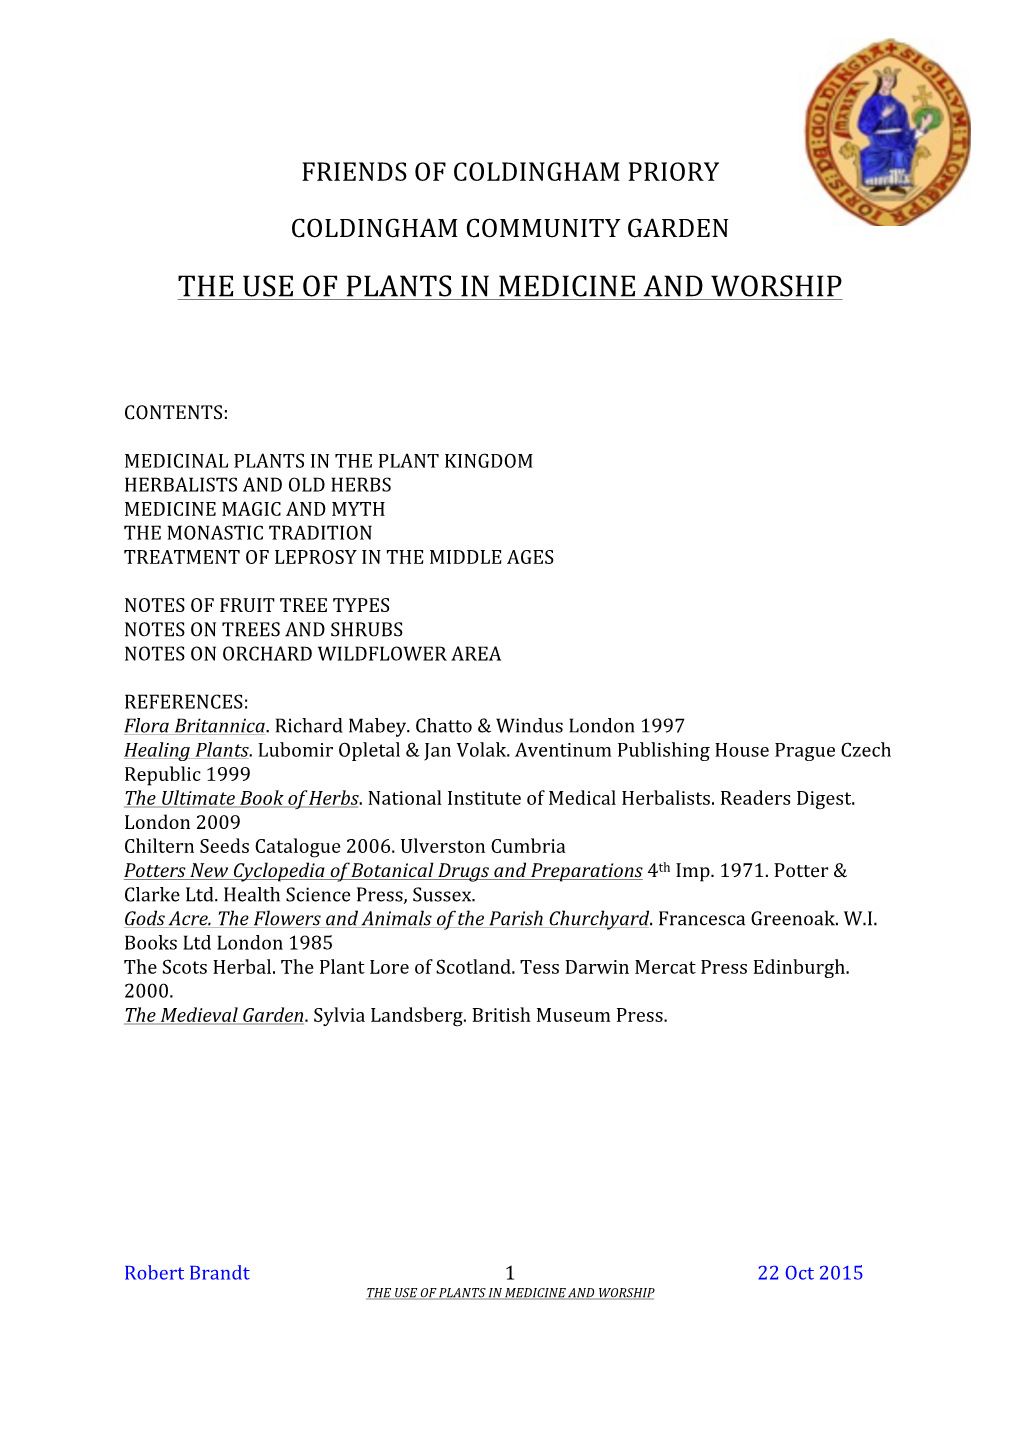 The Use of Plants in Medicine and Worship